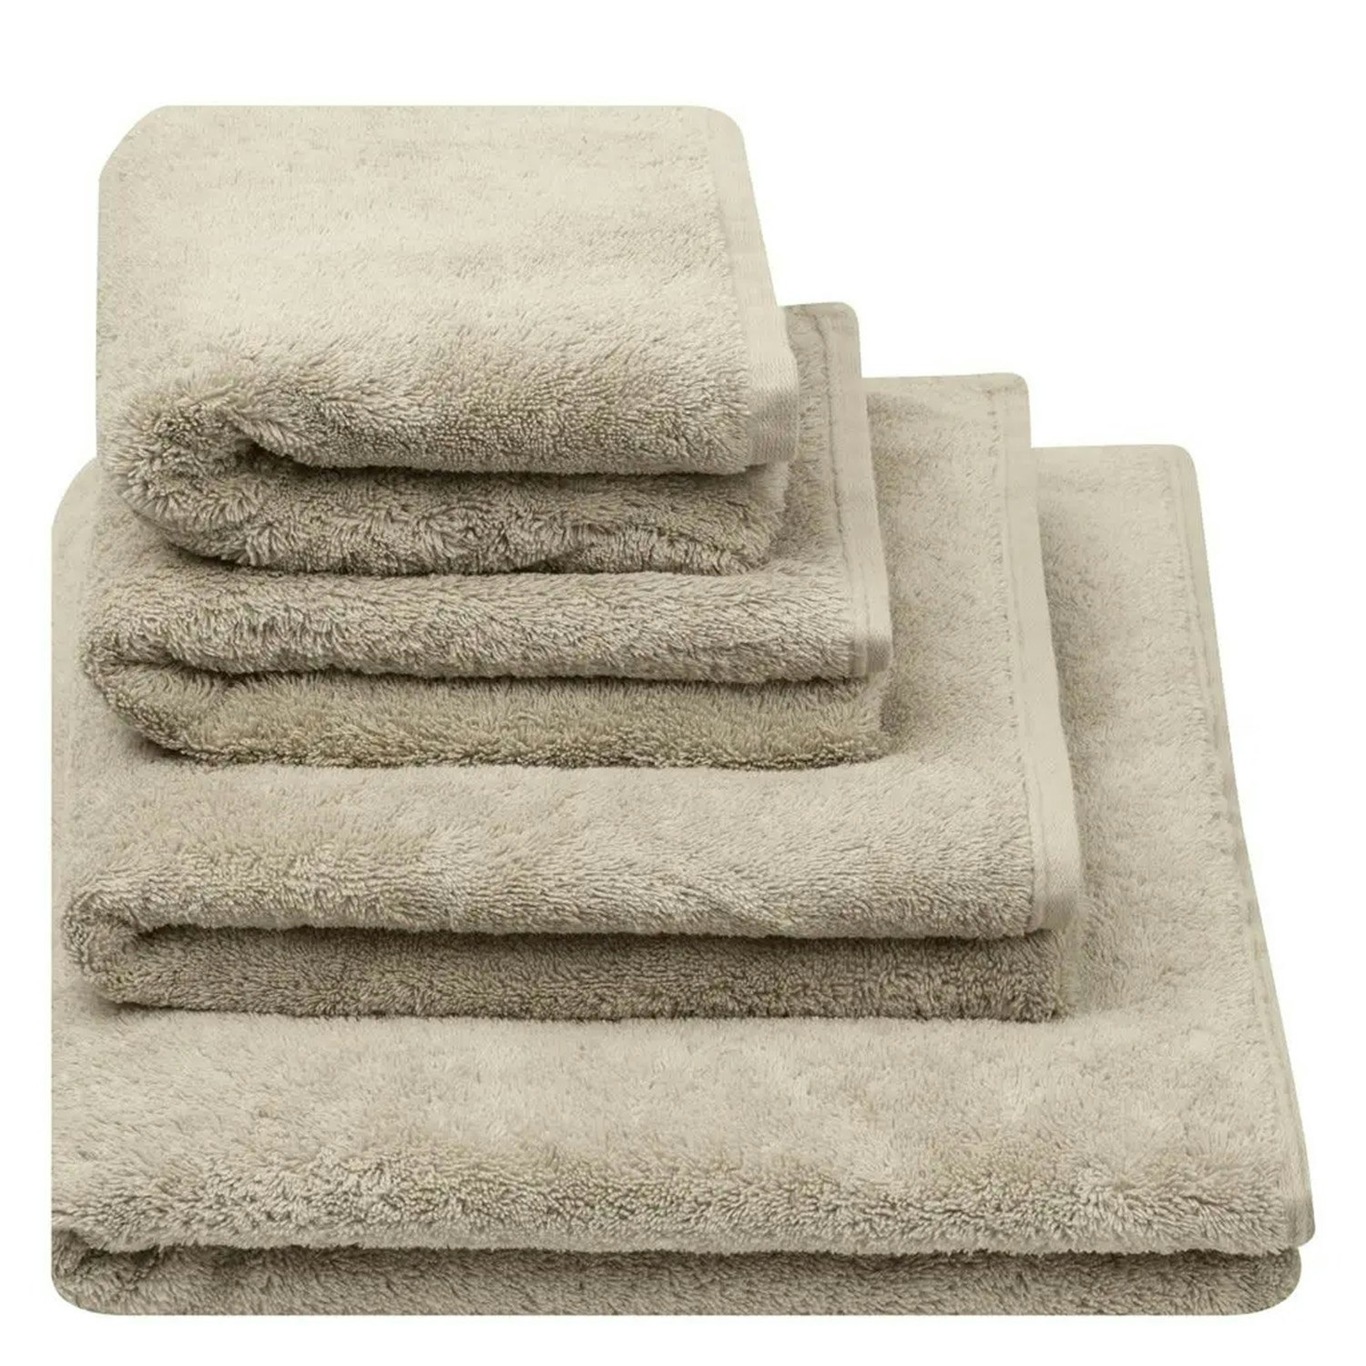 Loweswater Face Towel 30x30 cm, Birch